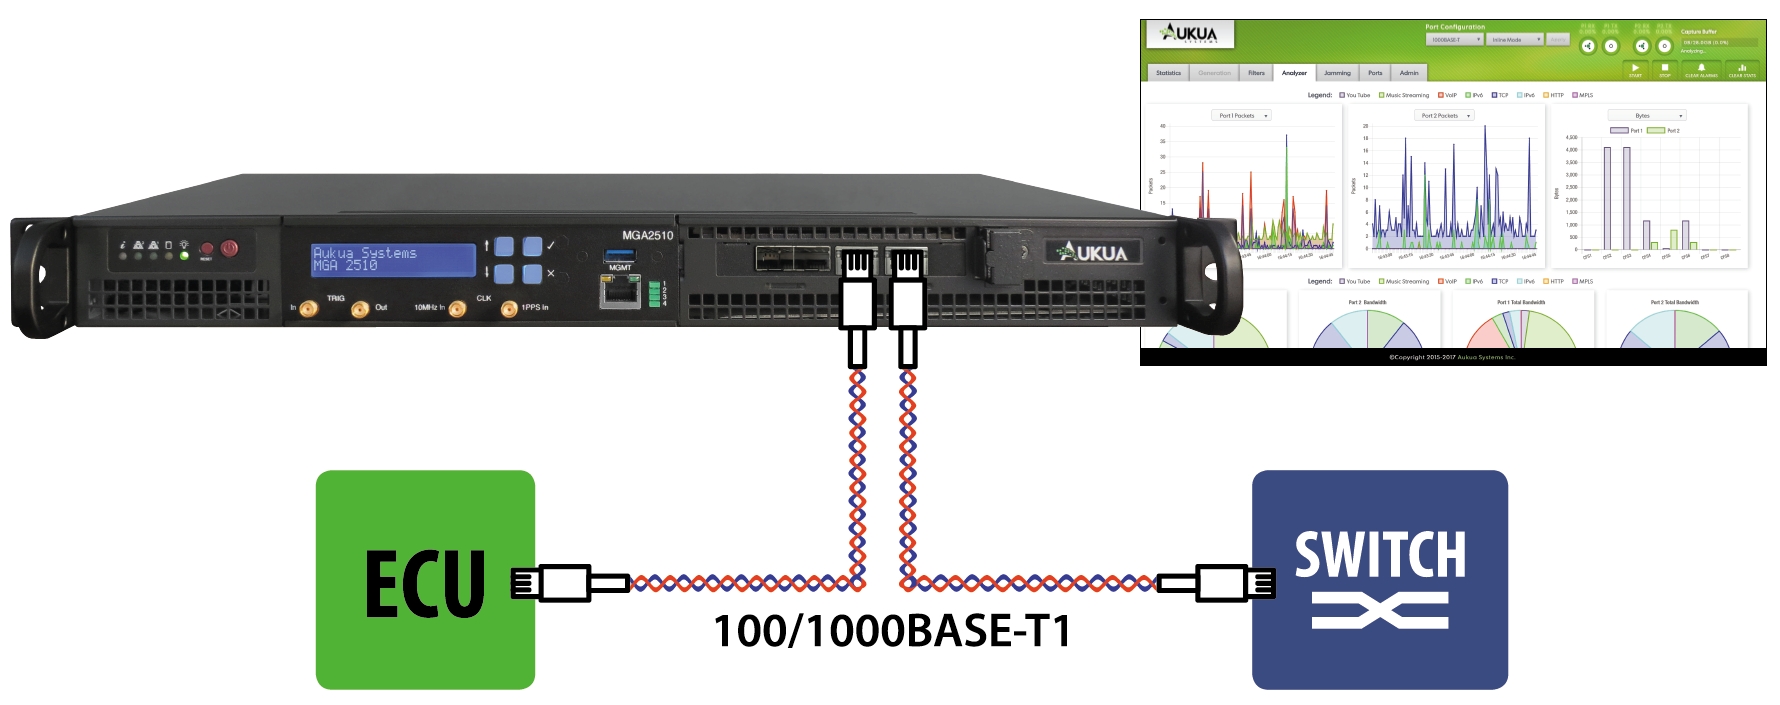 Example deployment of MGA2510 Automotive Ethernet Test Solution